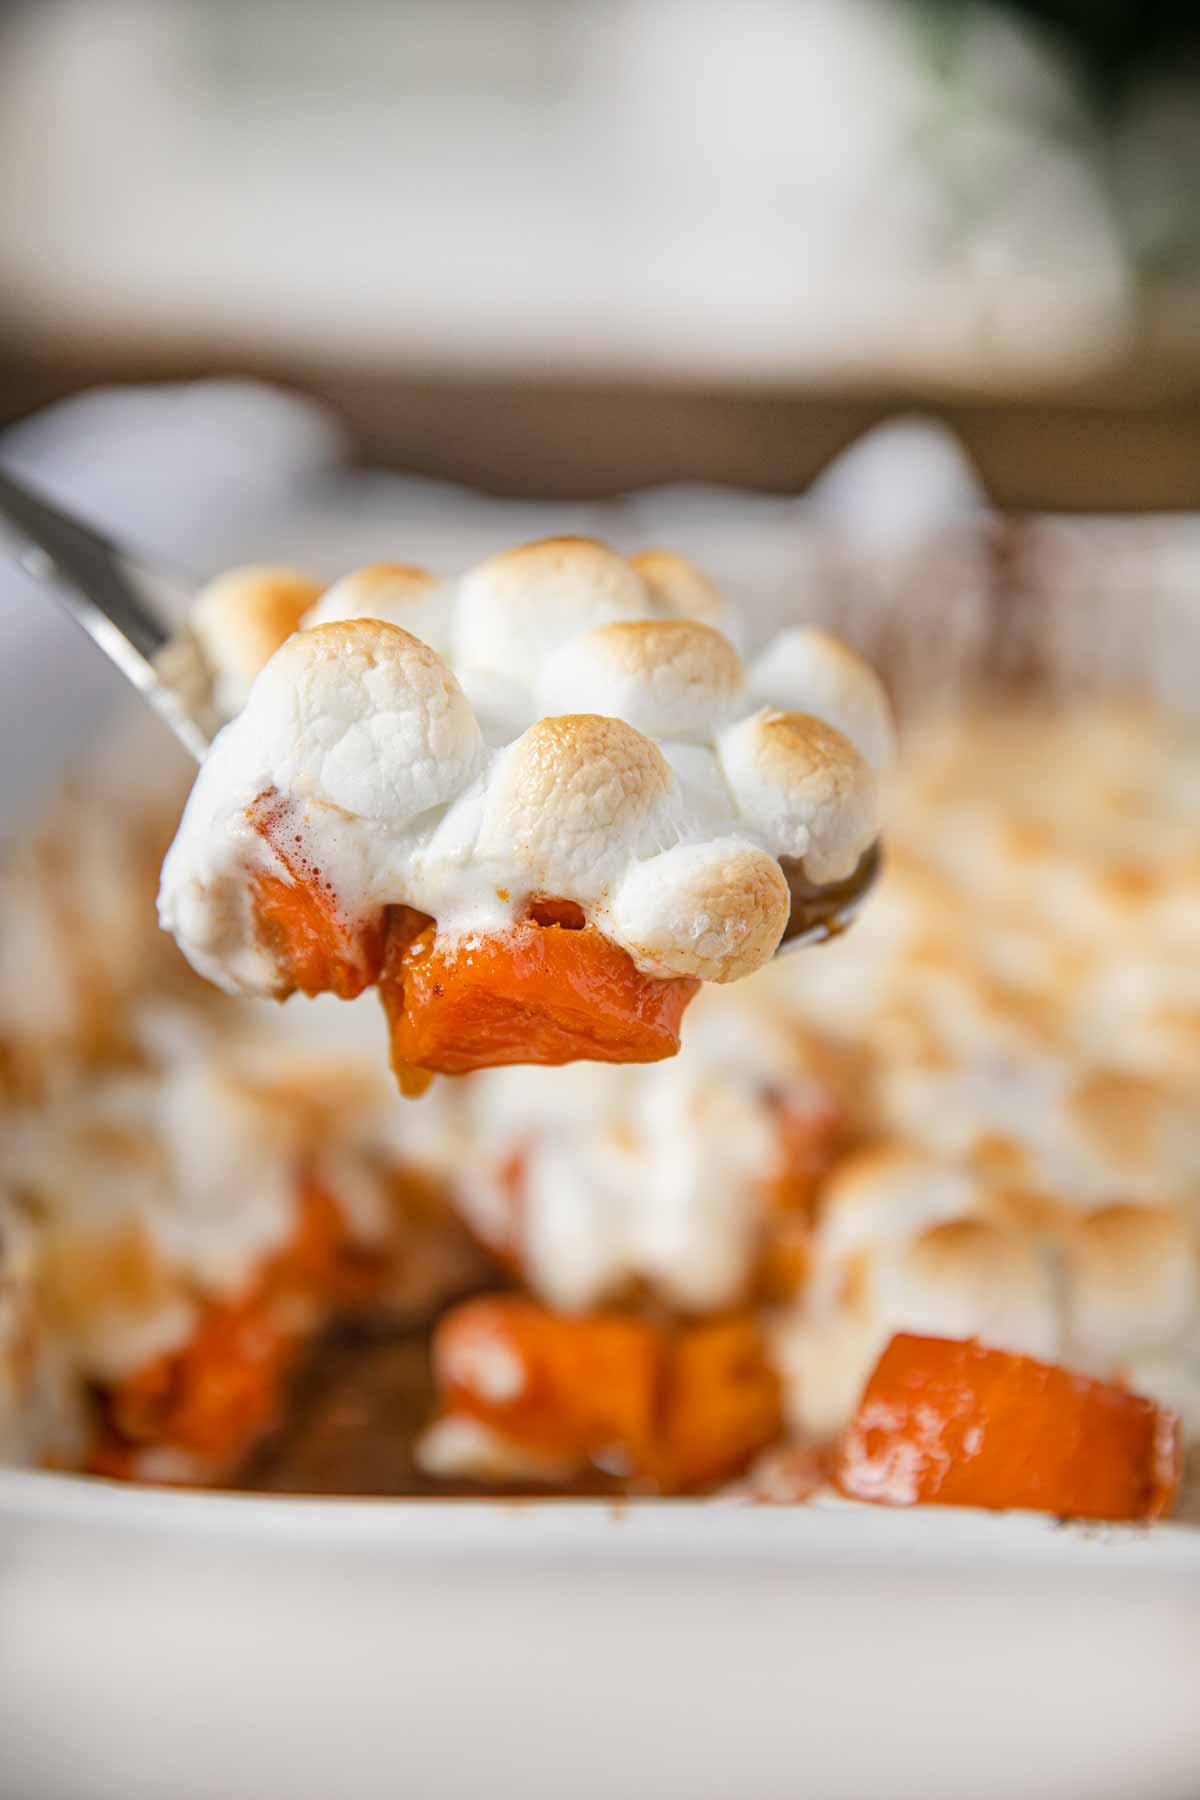 Candied Yams With Marshmallows Recipe